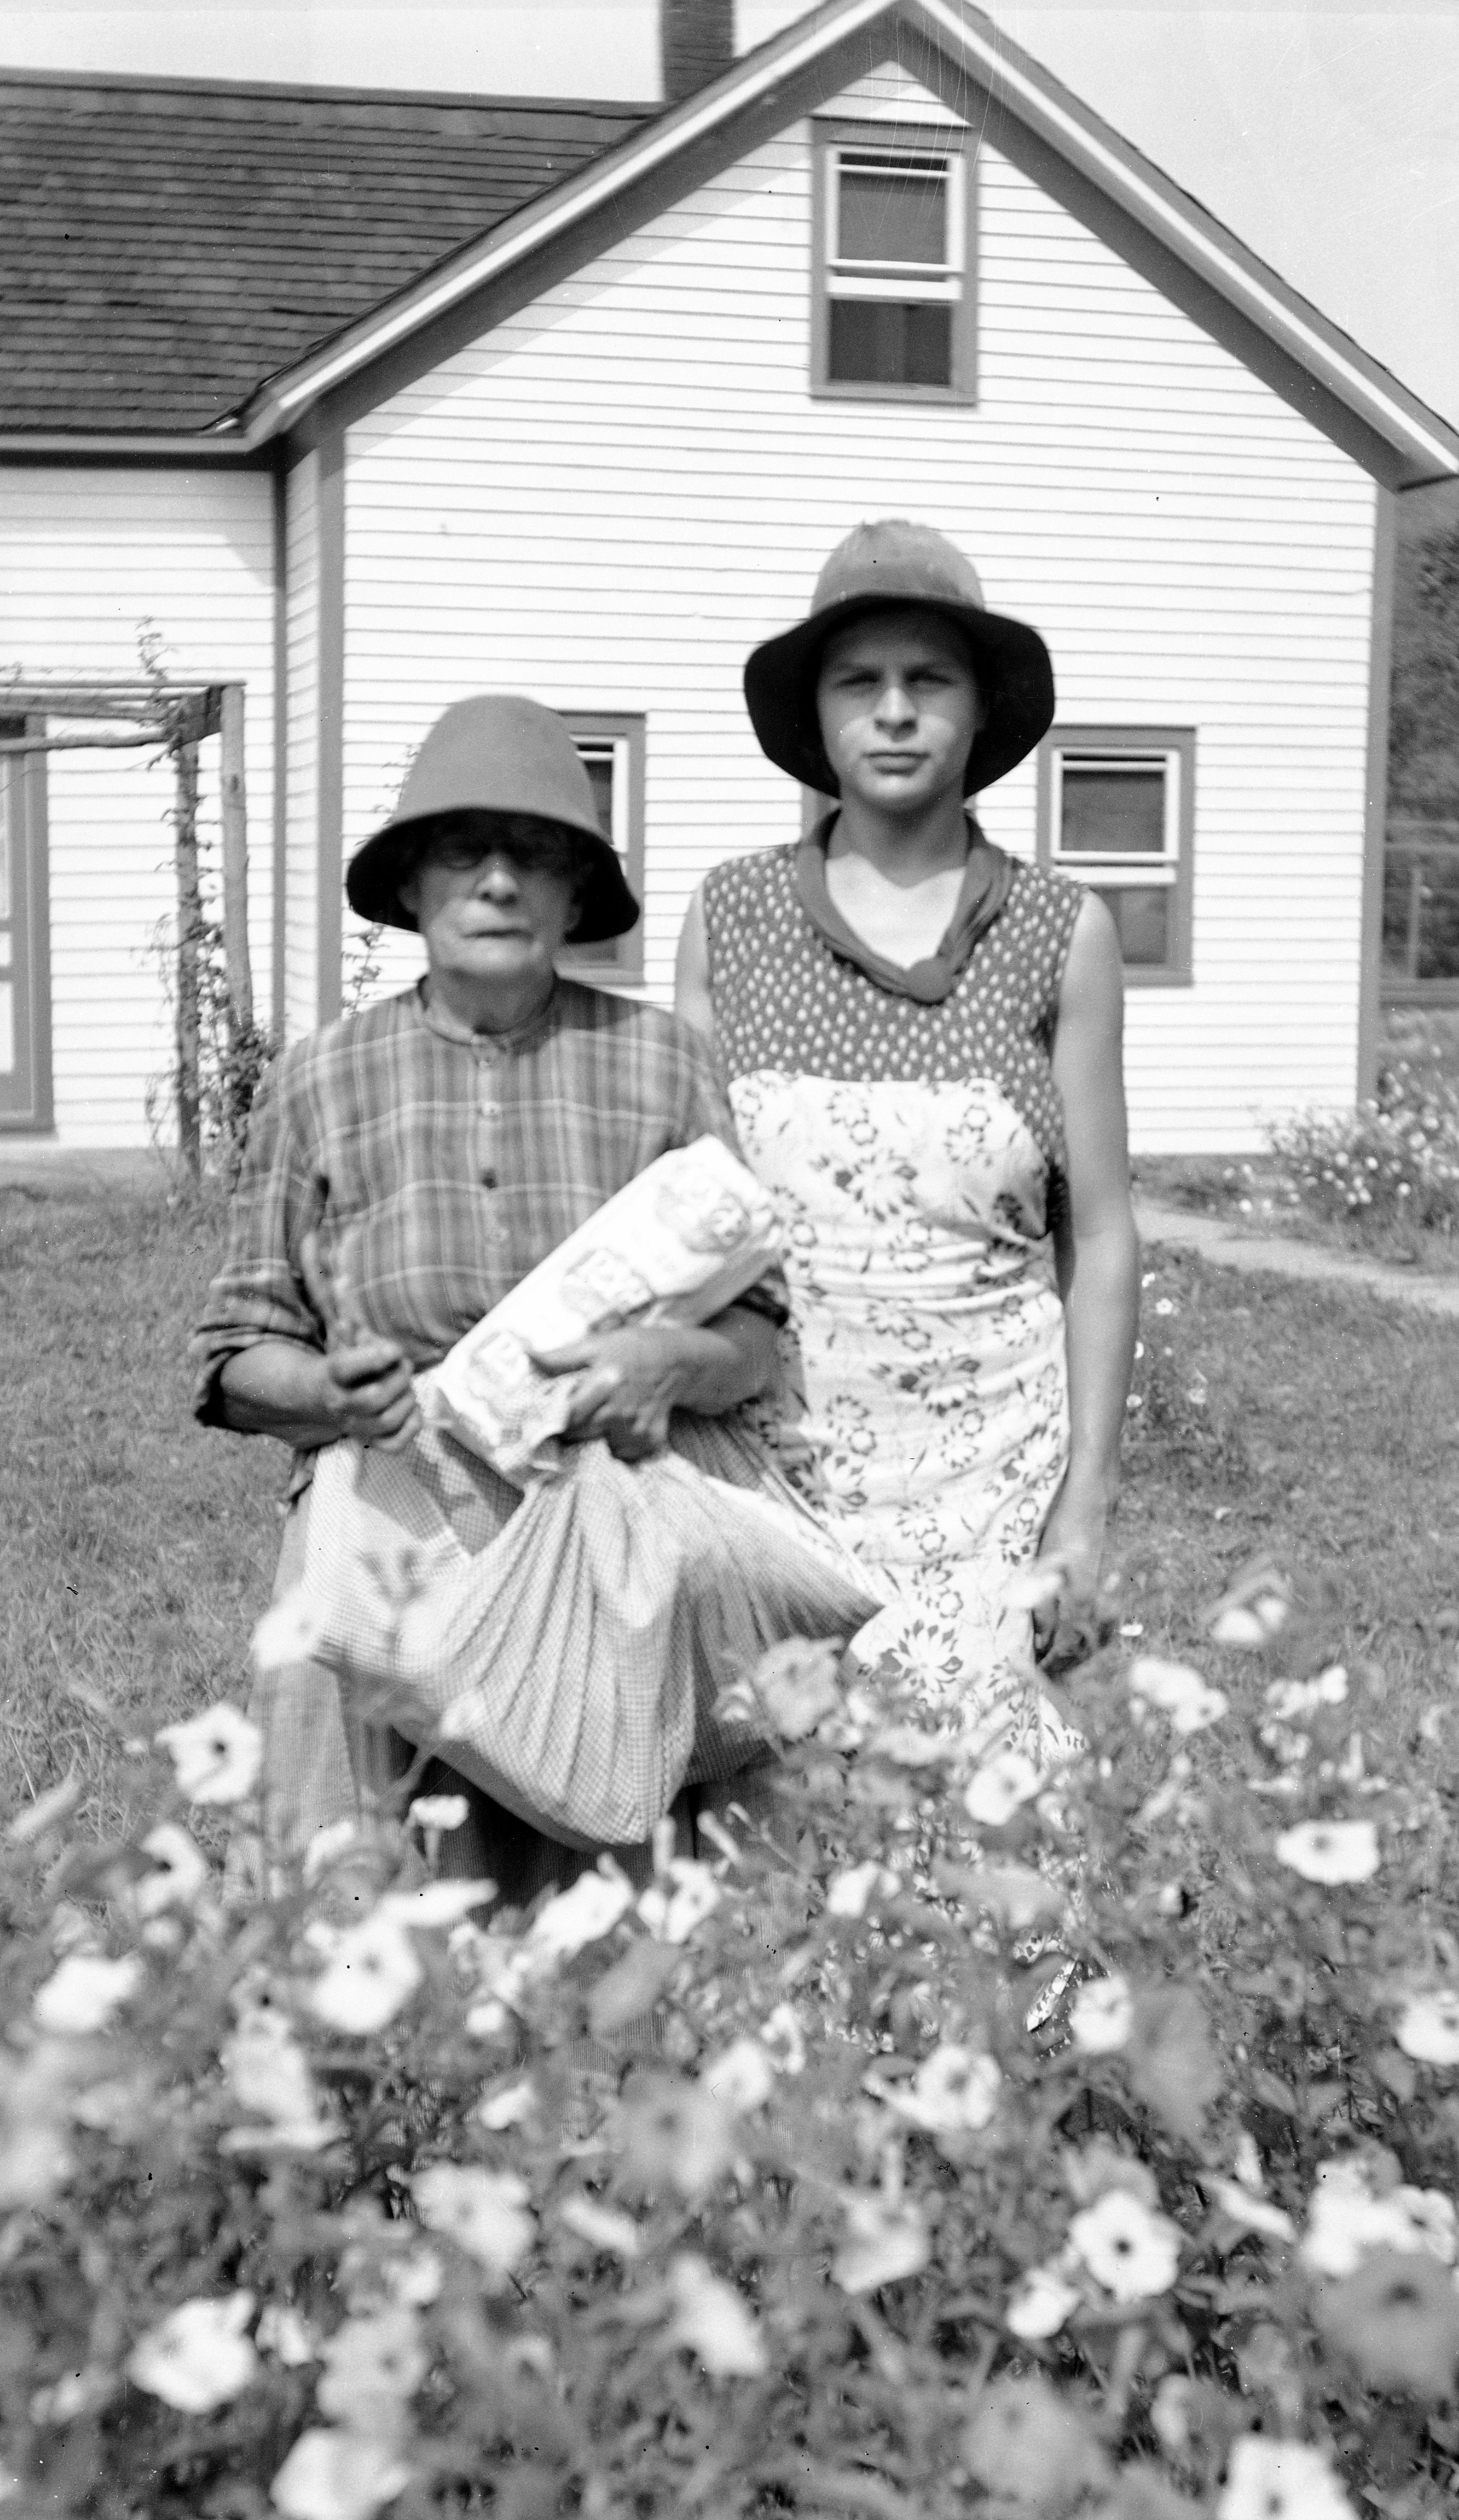 Black and white photo. Two people posed behind a waist-high flowering plant. Home and yard in the background.